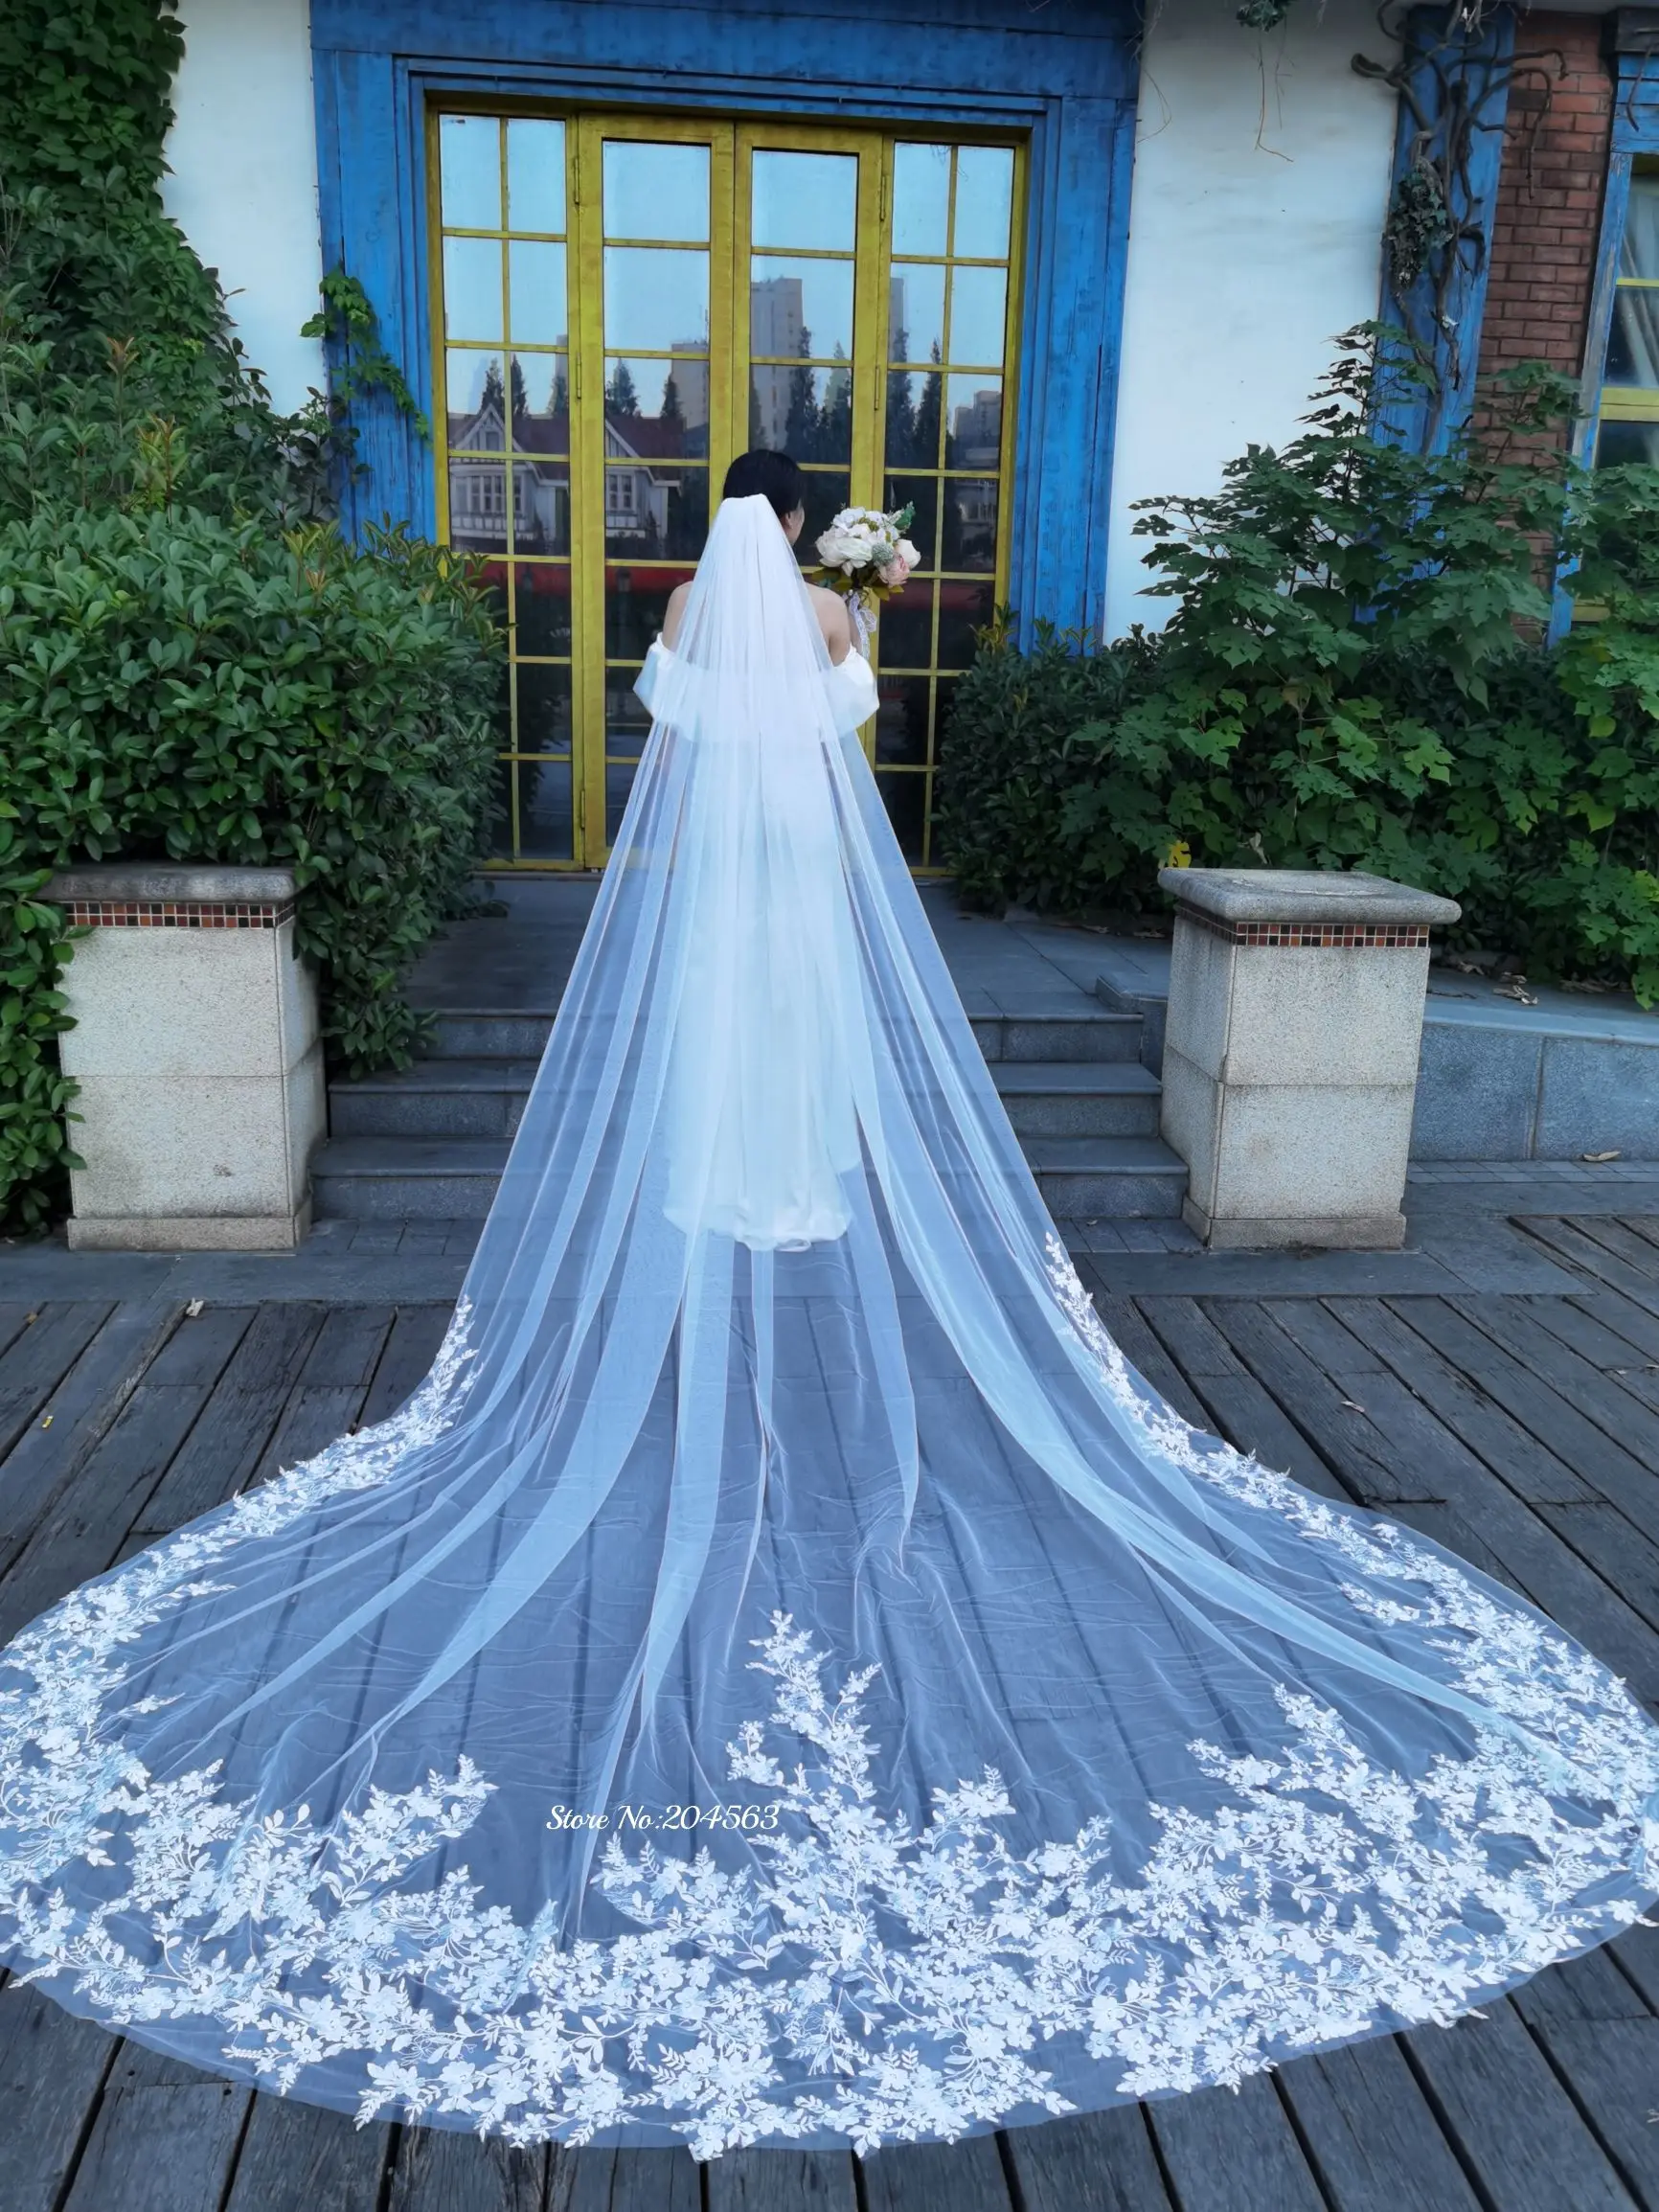 https://ae01.alicdn.com/kf/Haf28ac83cbf04e5cbbd06871c2966a93t/Romantic-One-Layer-Lace-Wedding-Veils-with-Comb-Cathedral-Veil-for-Bride-Wedding-Accessories-MM.jpg